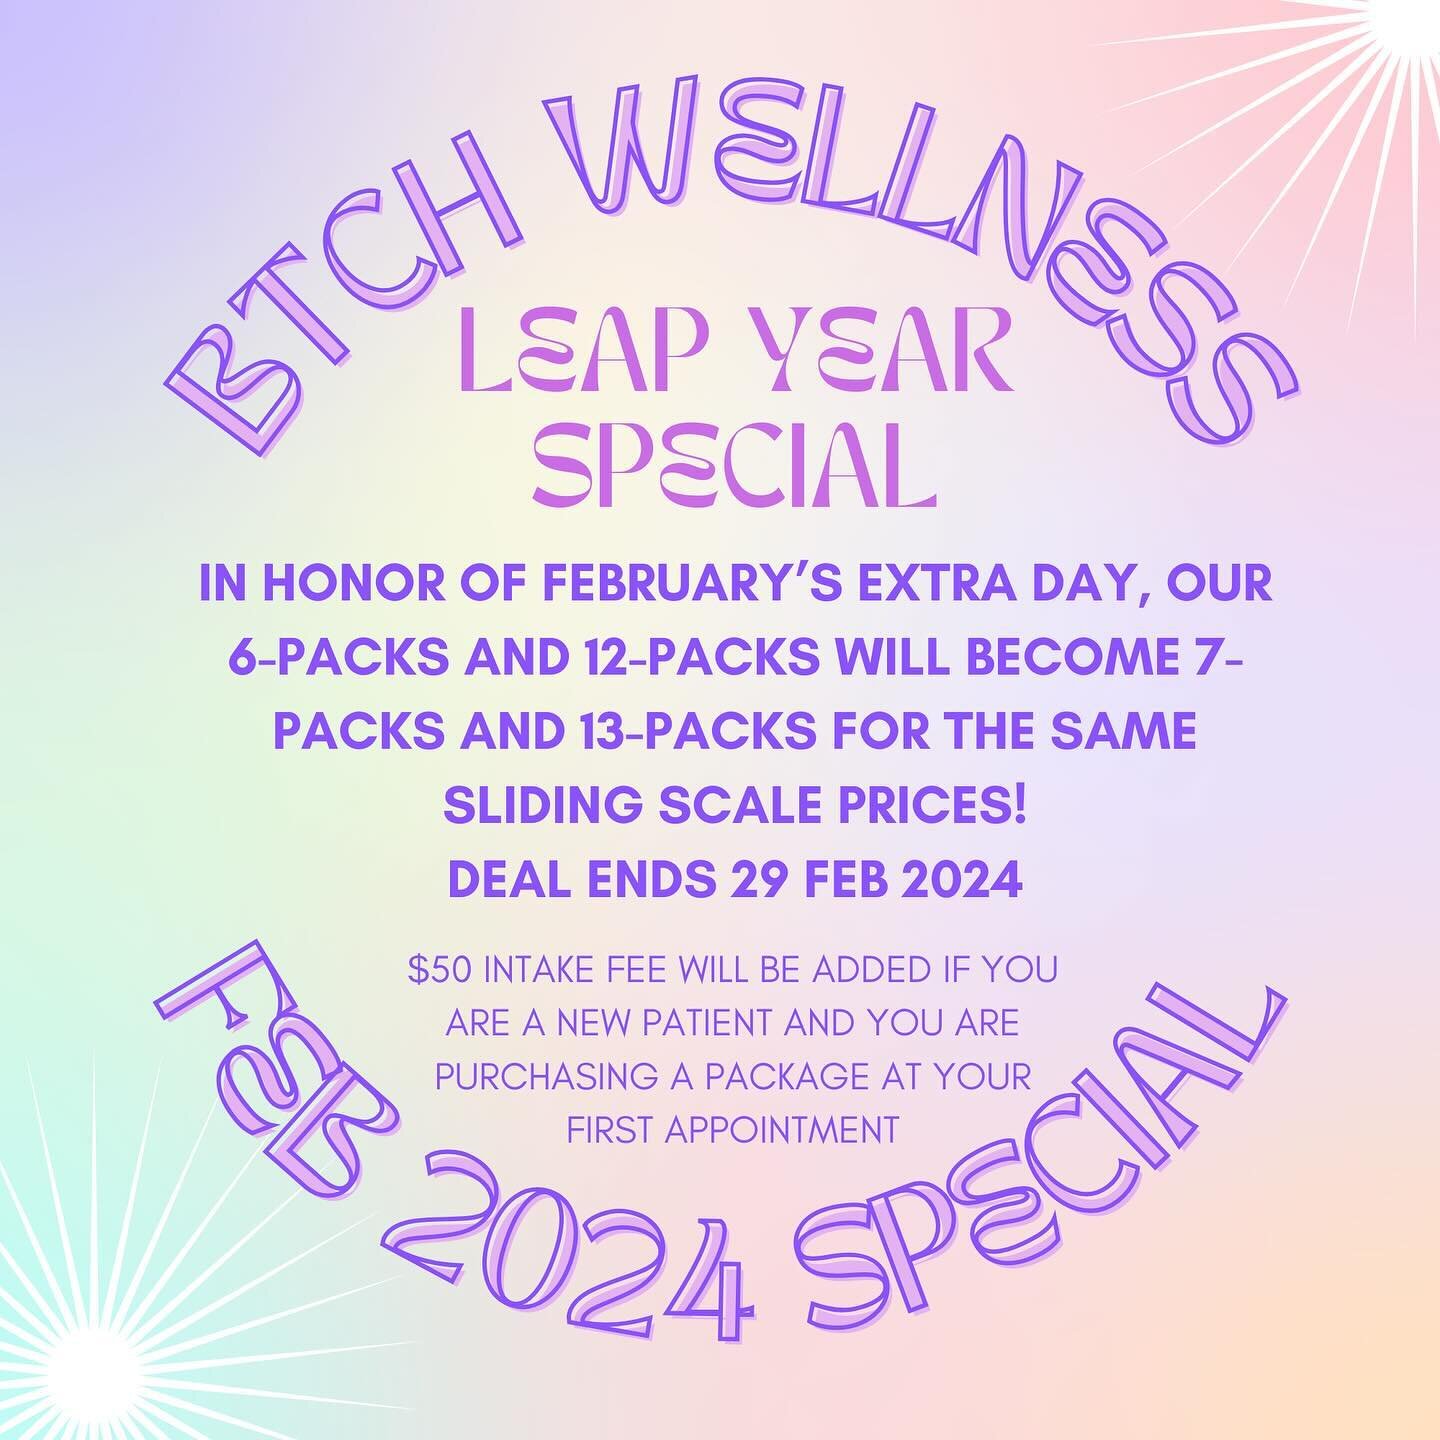 This month, you are allowed to be even more extra because we&rsquo;ve got an EXTRA day! 

Until February 29, enjoy the LEAP YEAR SPECIAL, where our 6-pack and 12-pack come with ONE EXTRA SESSION becoming 7-packs and 13-packs for the SAME sliding scal